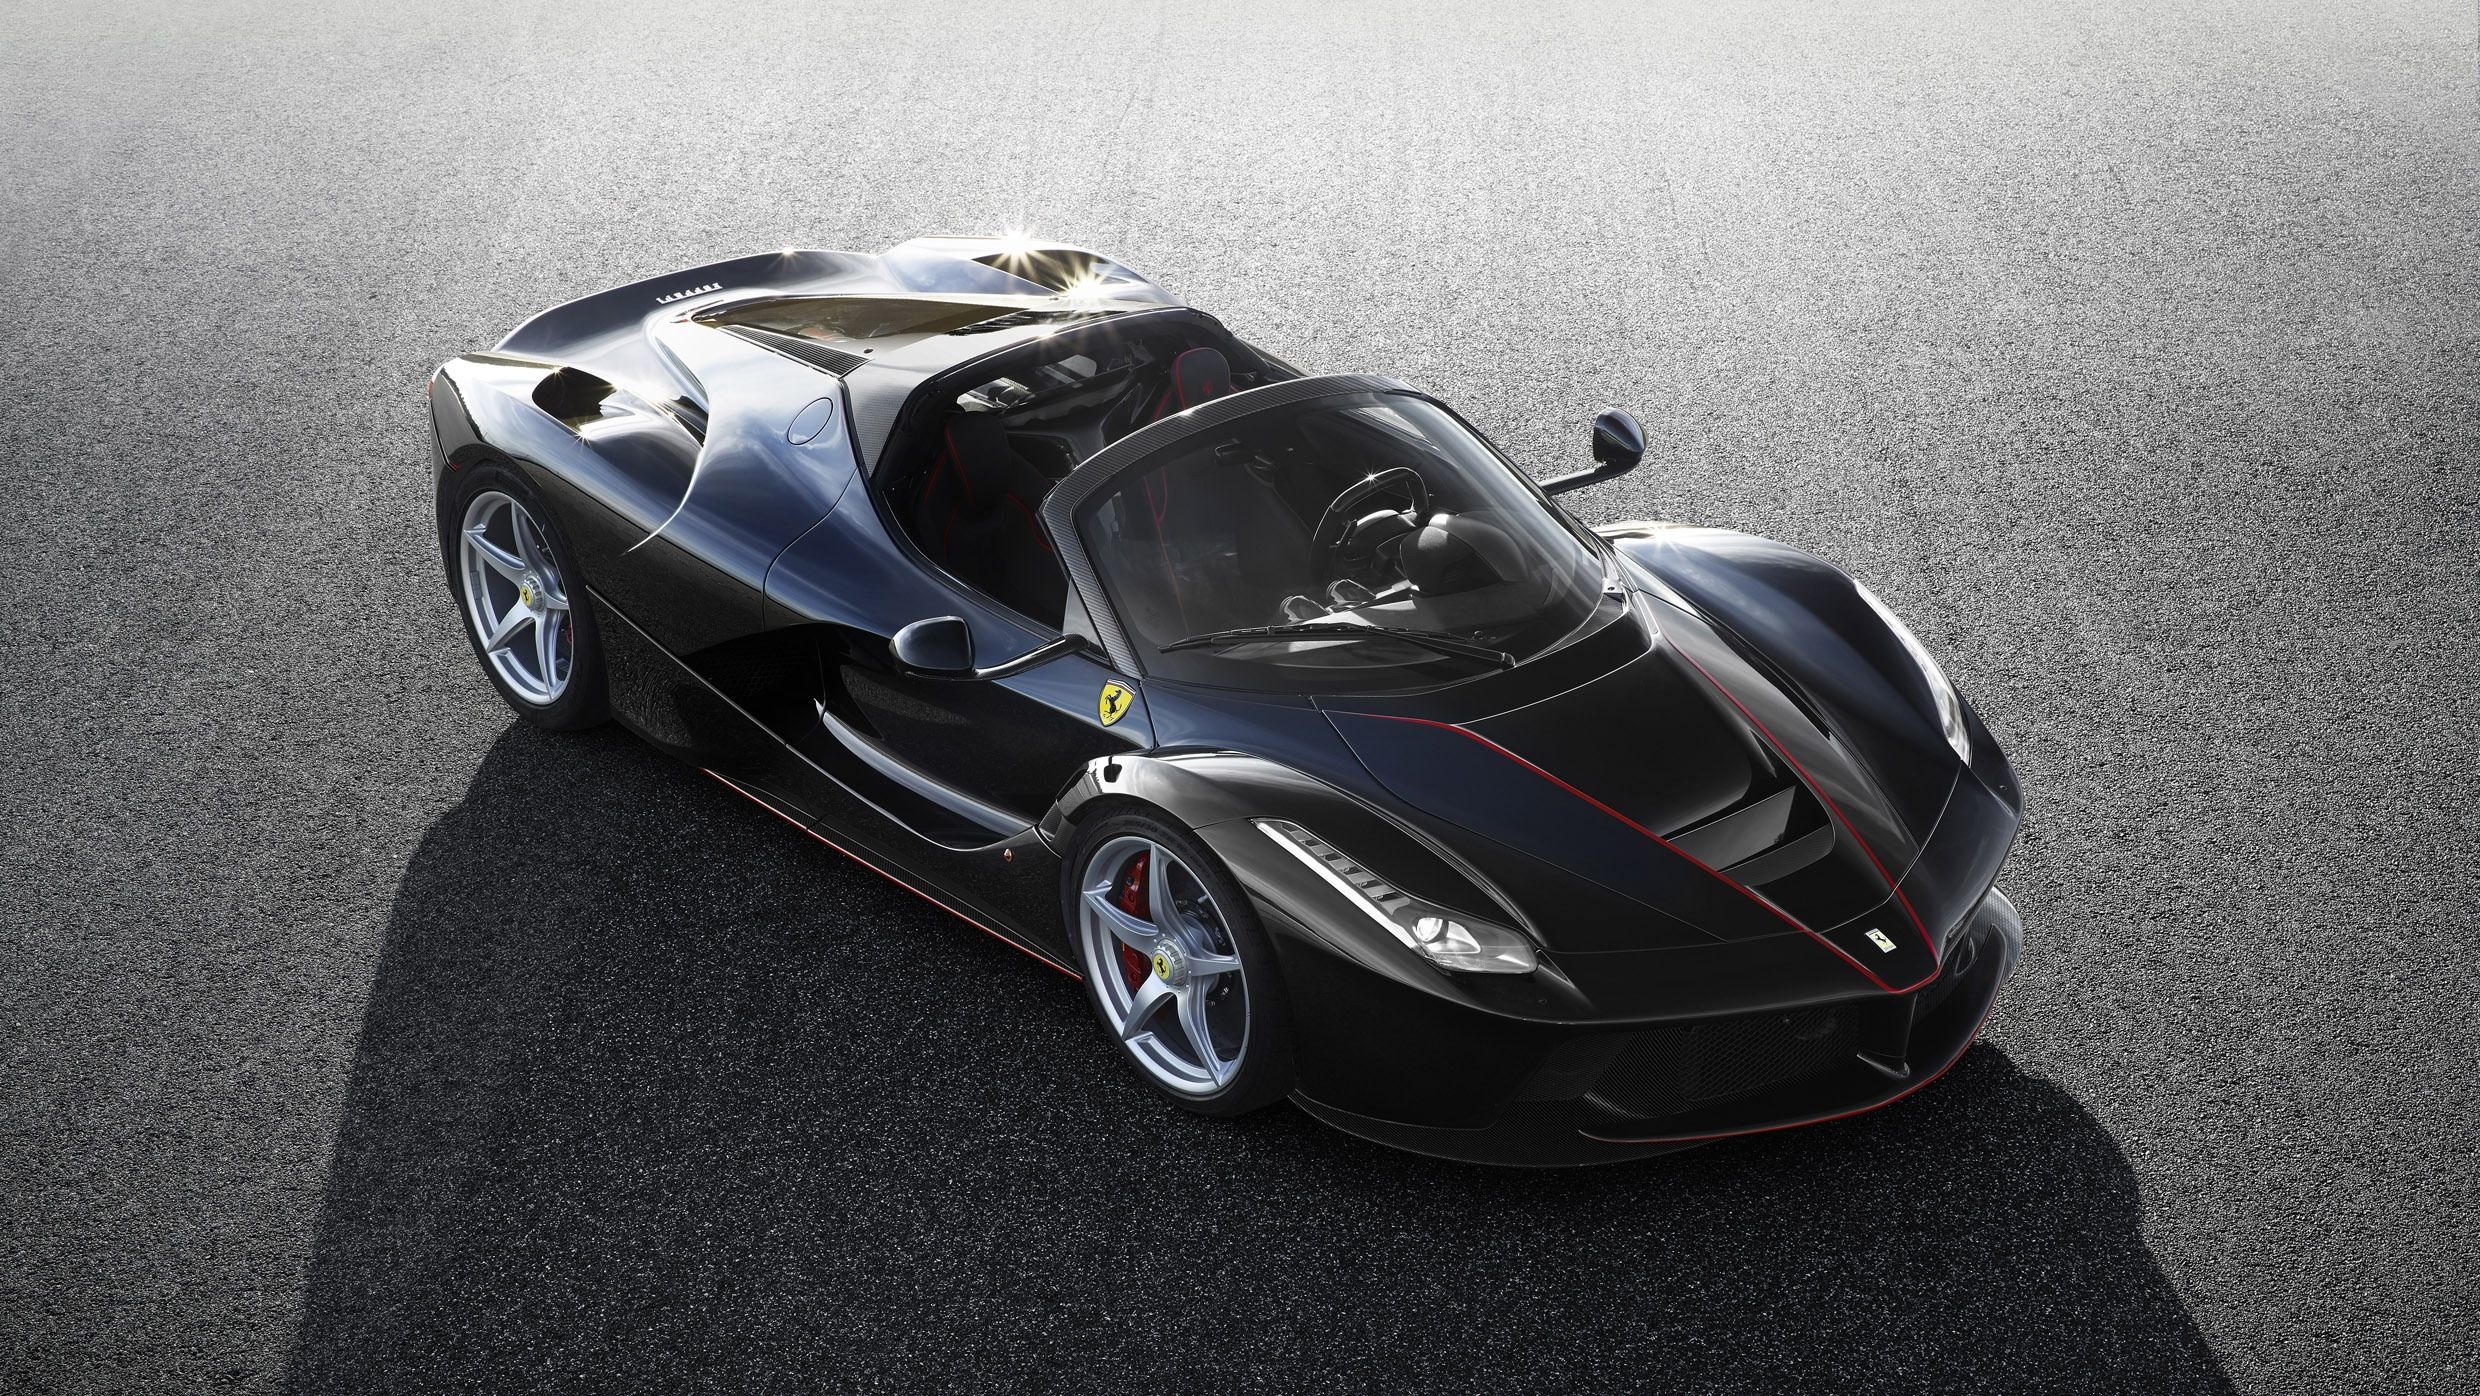 2016 Car Collector And Racing Legend Denied LaFerrari Spider; Sues Ferrari for Defamation and Reputational Injury